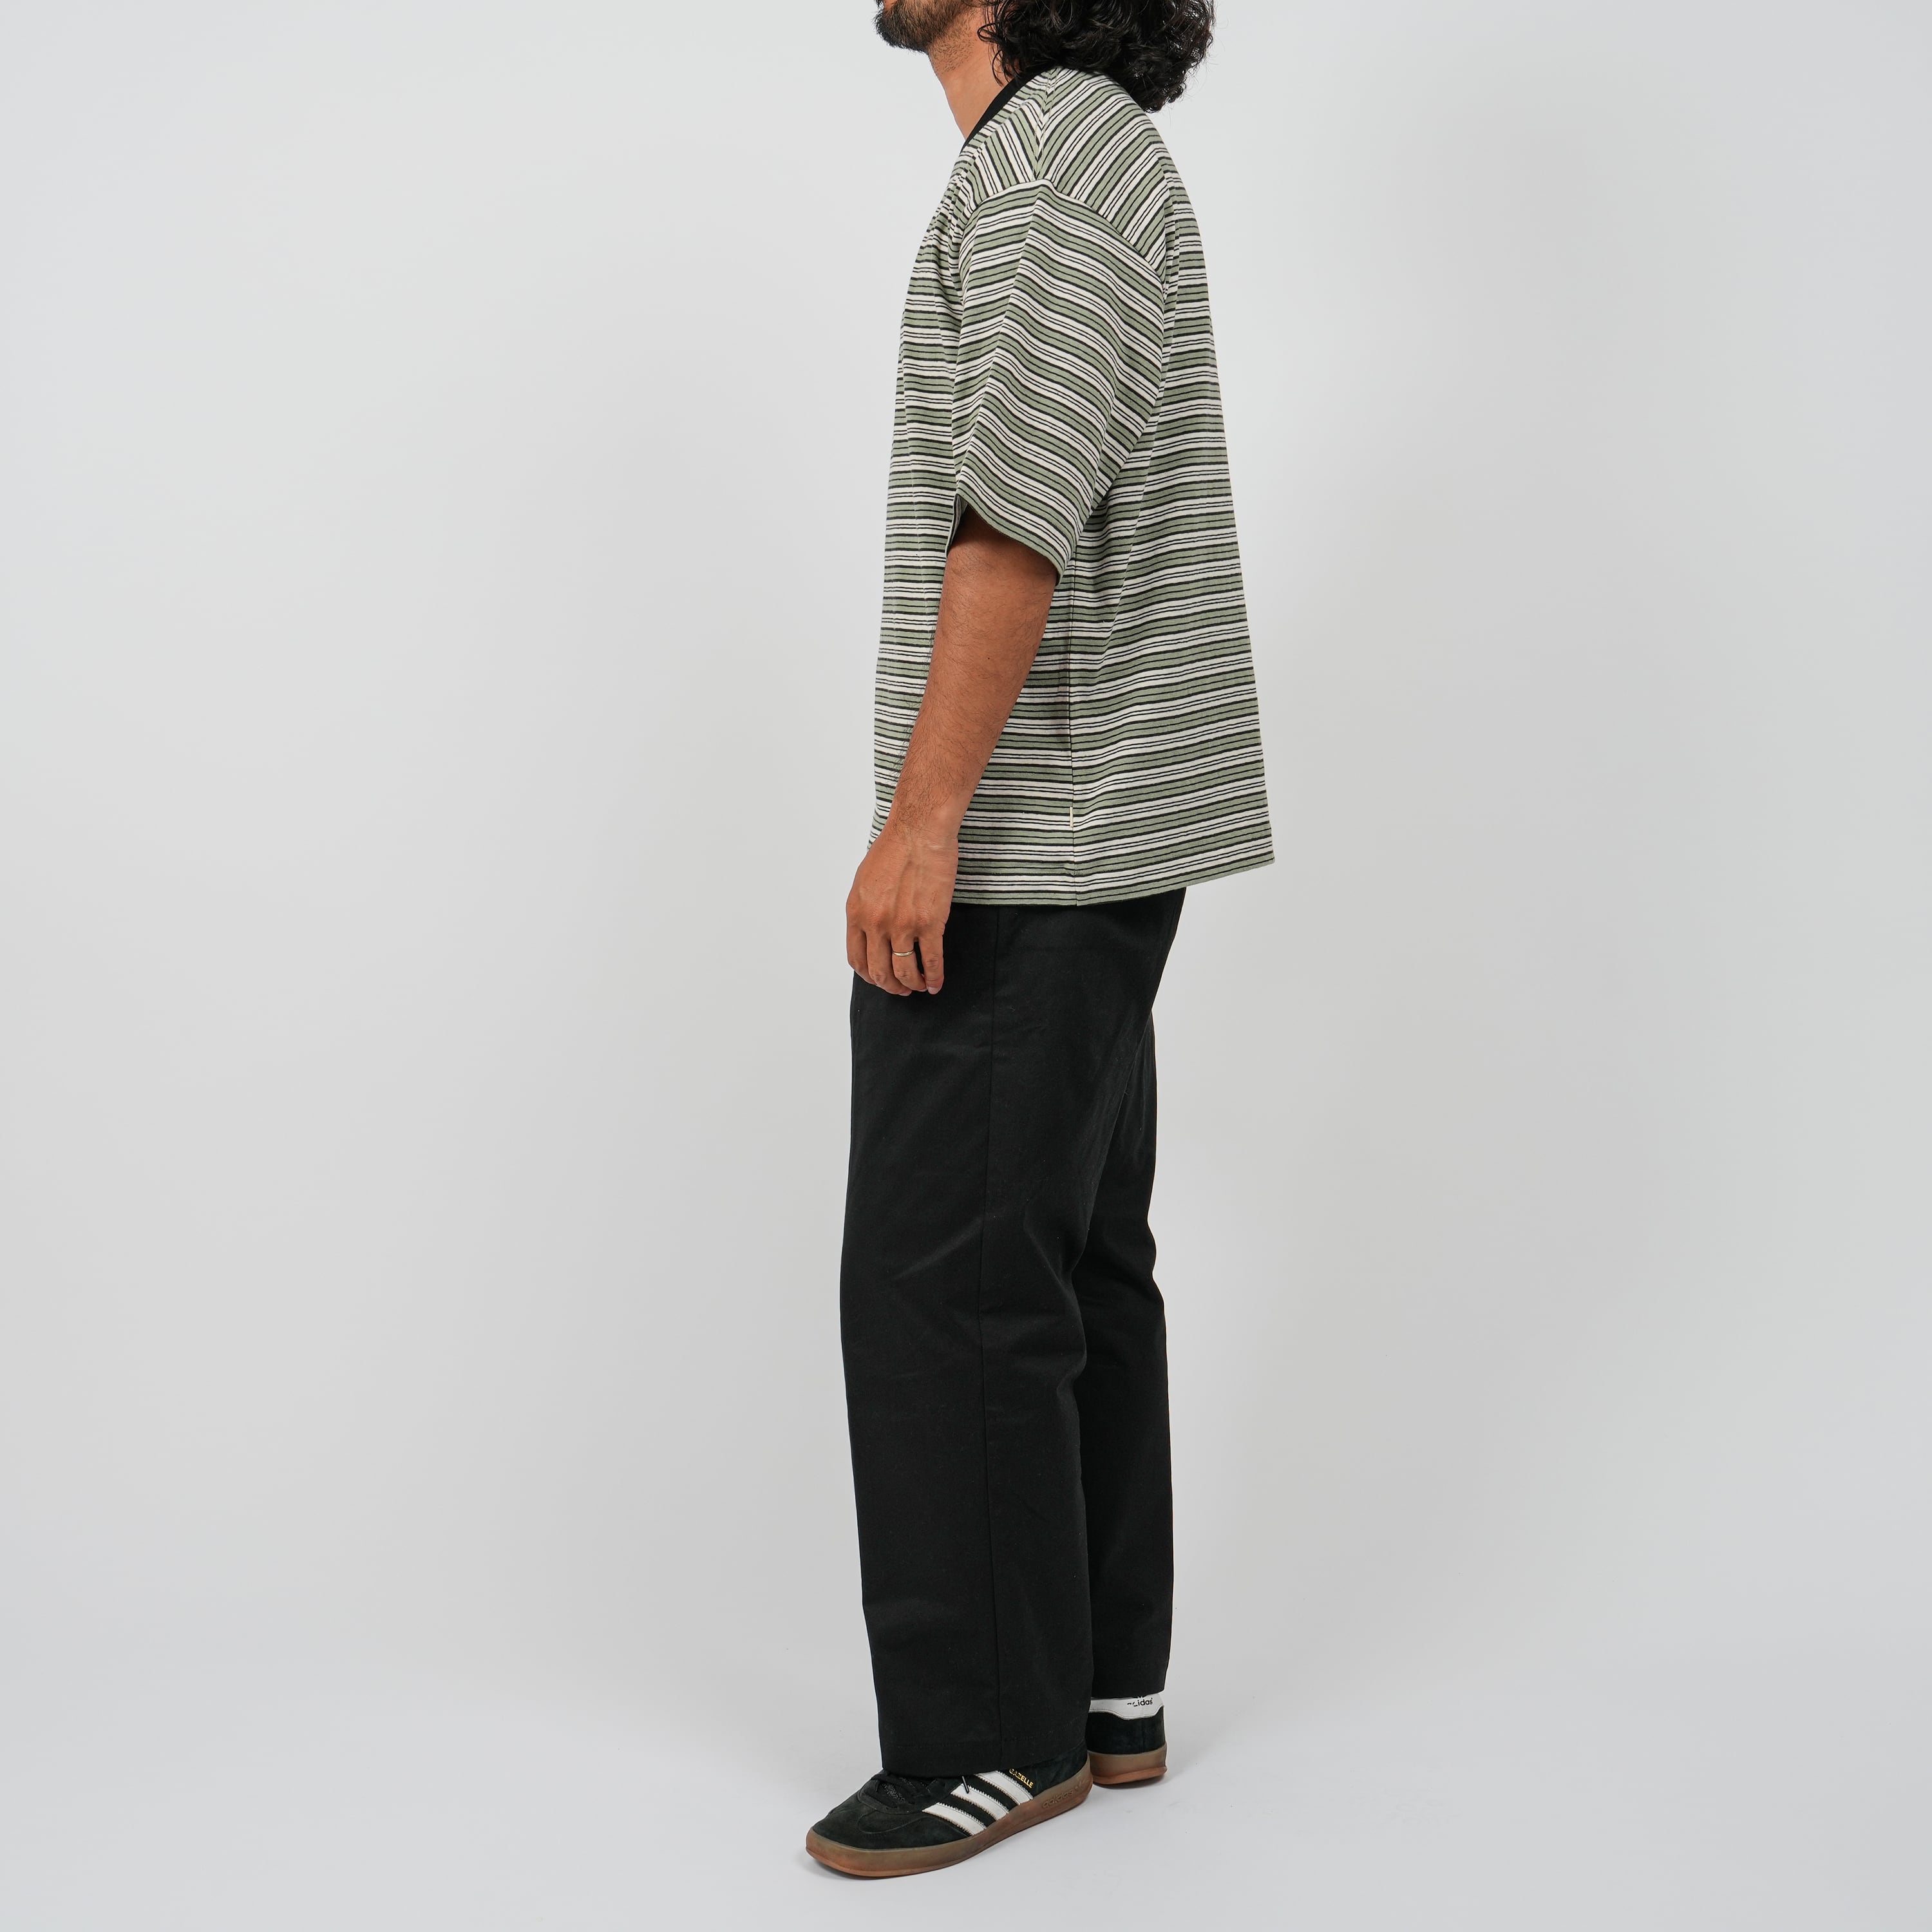 OVY Multi Border Relax Fit T-shirts